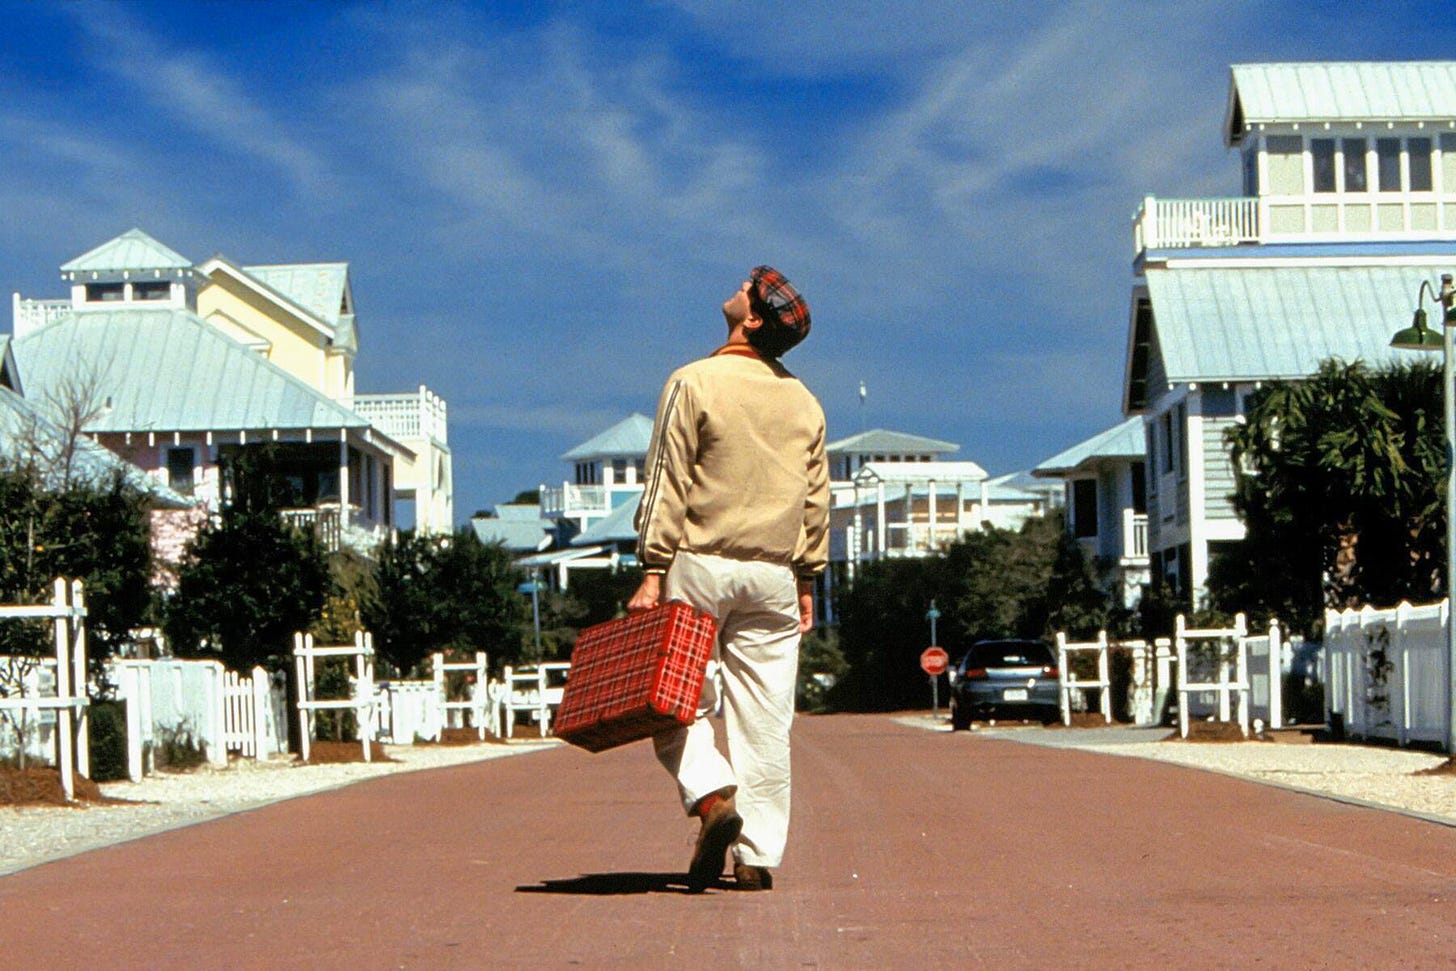 Vacationing in the Florida Beach Town Where The Truman Show Was Filmed